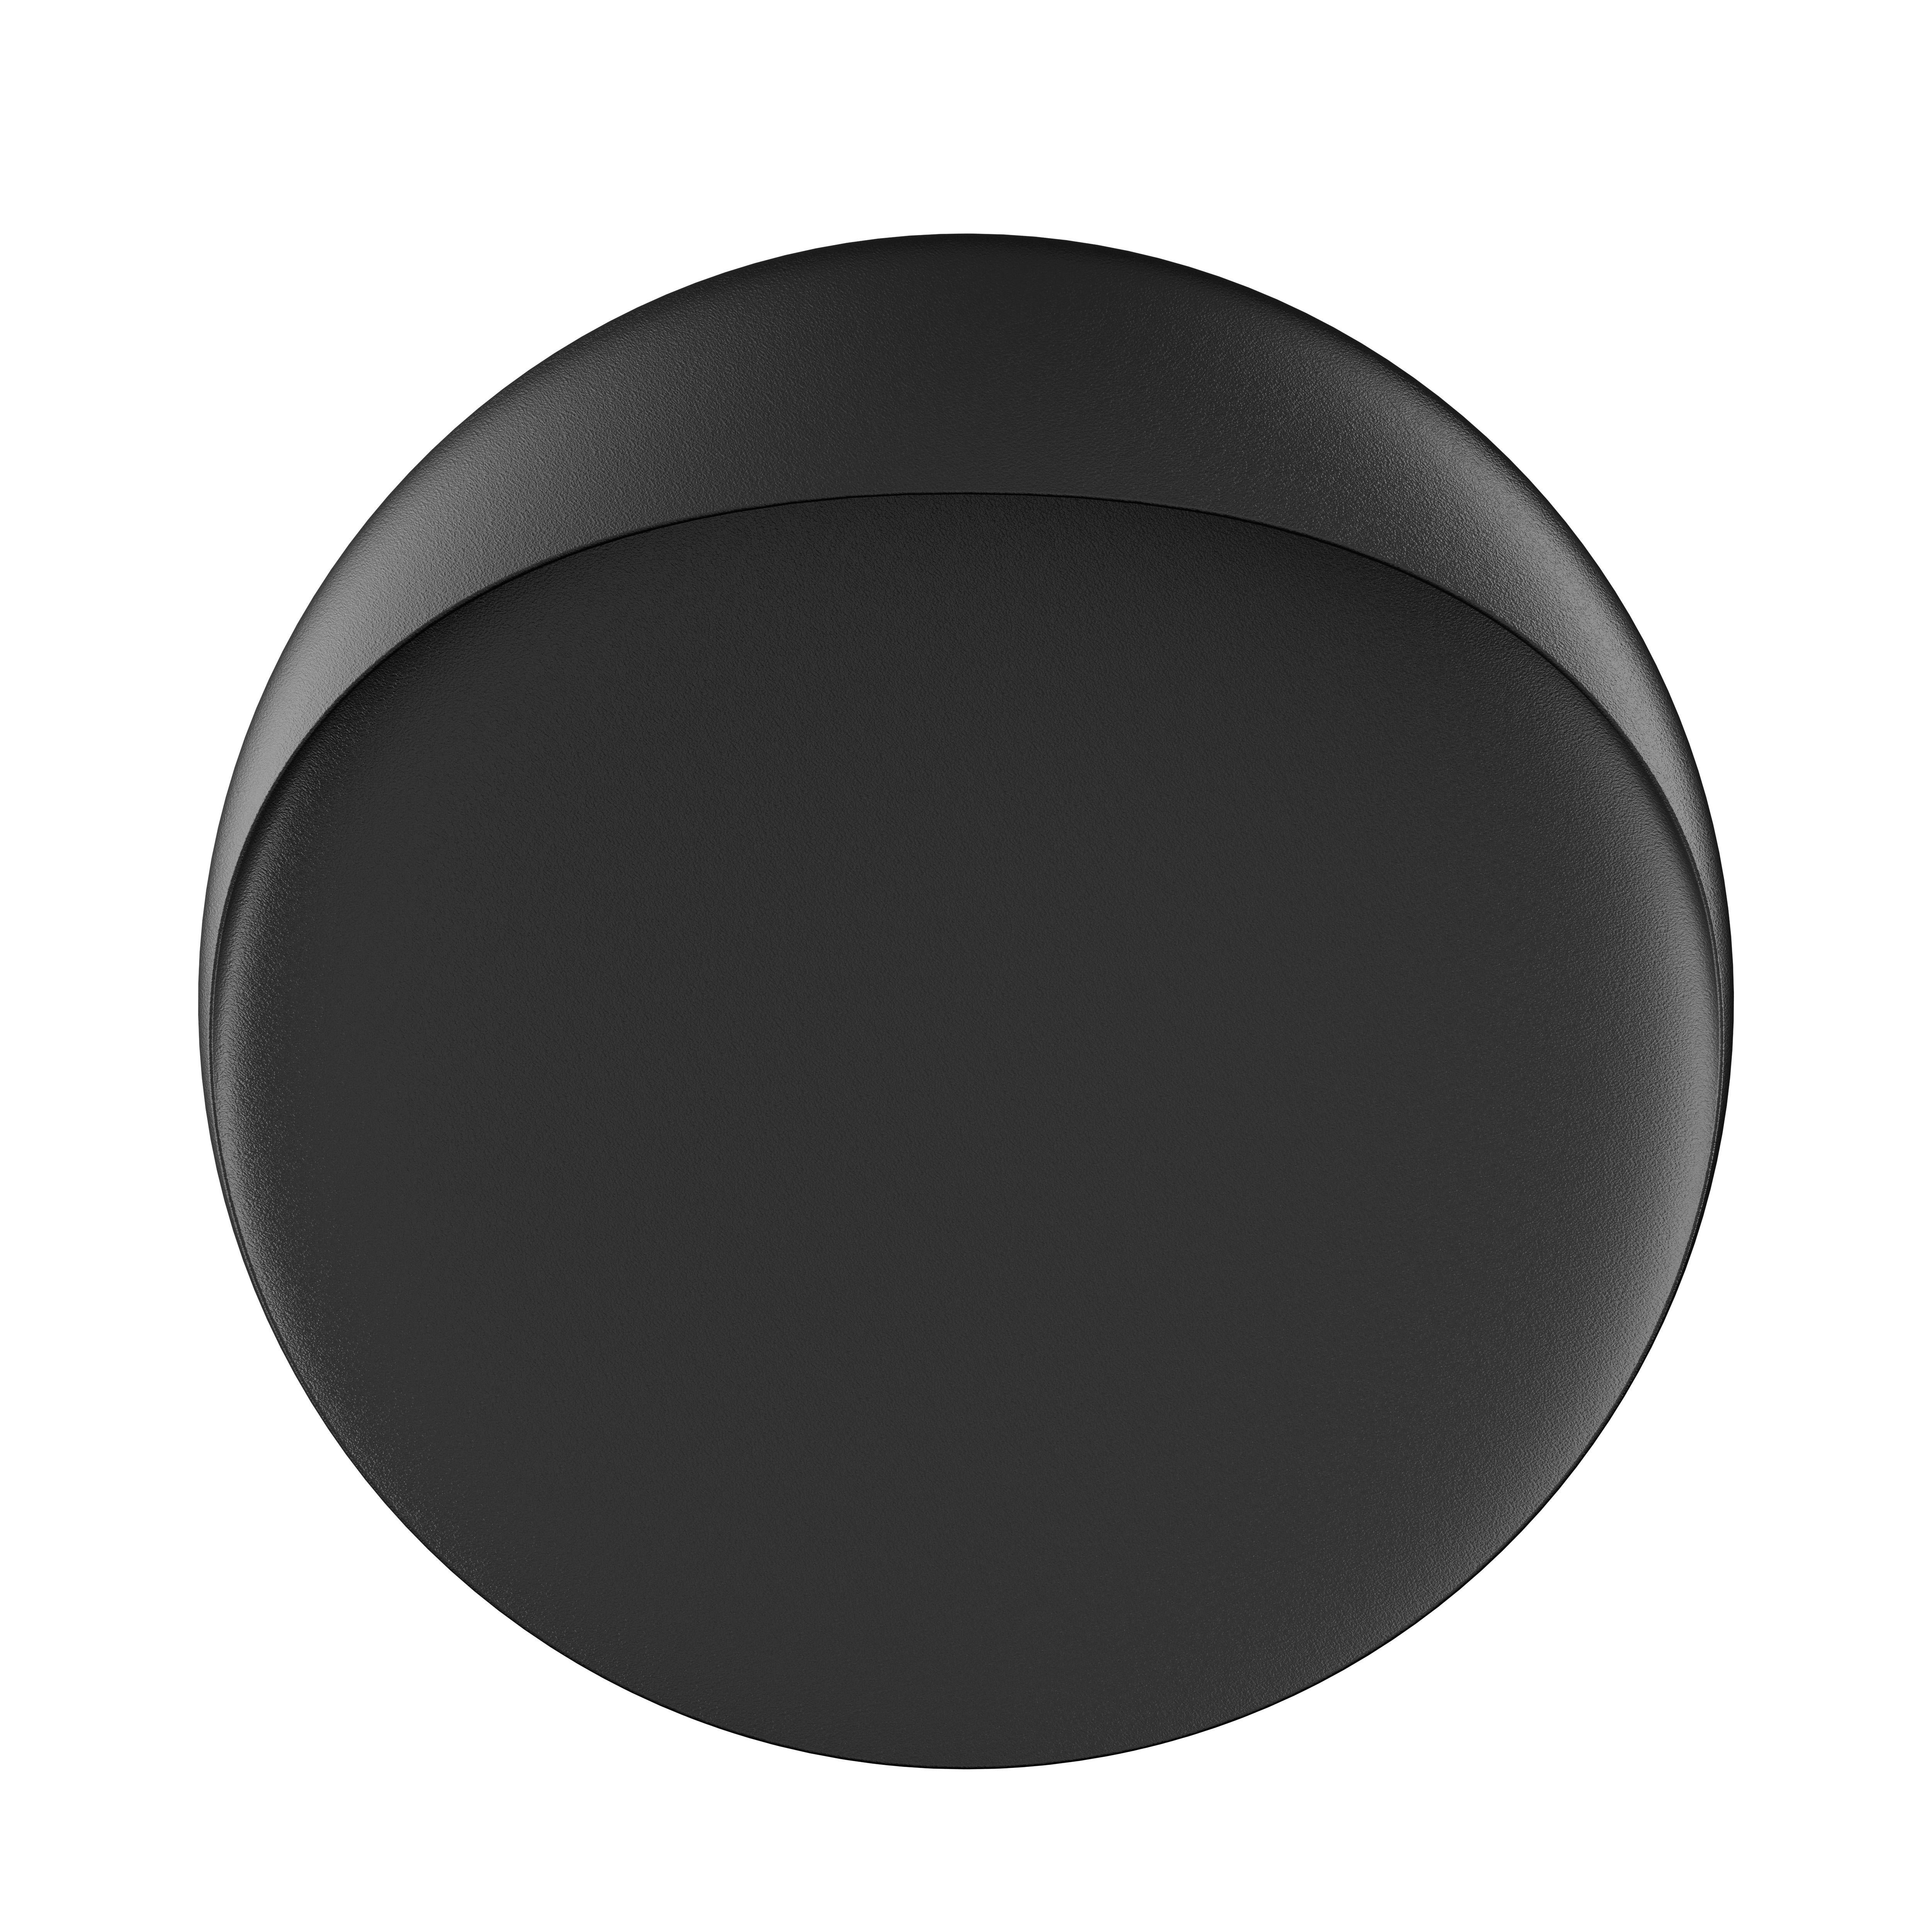 Small 'Flindt' Indoor or Outdoor Wall Light in Black for Louis Poulsen In New Condition For Sale In Glendale, CA